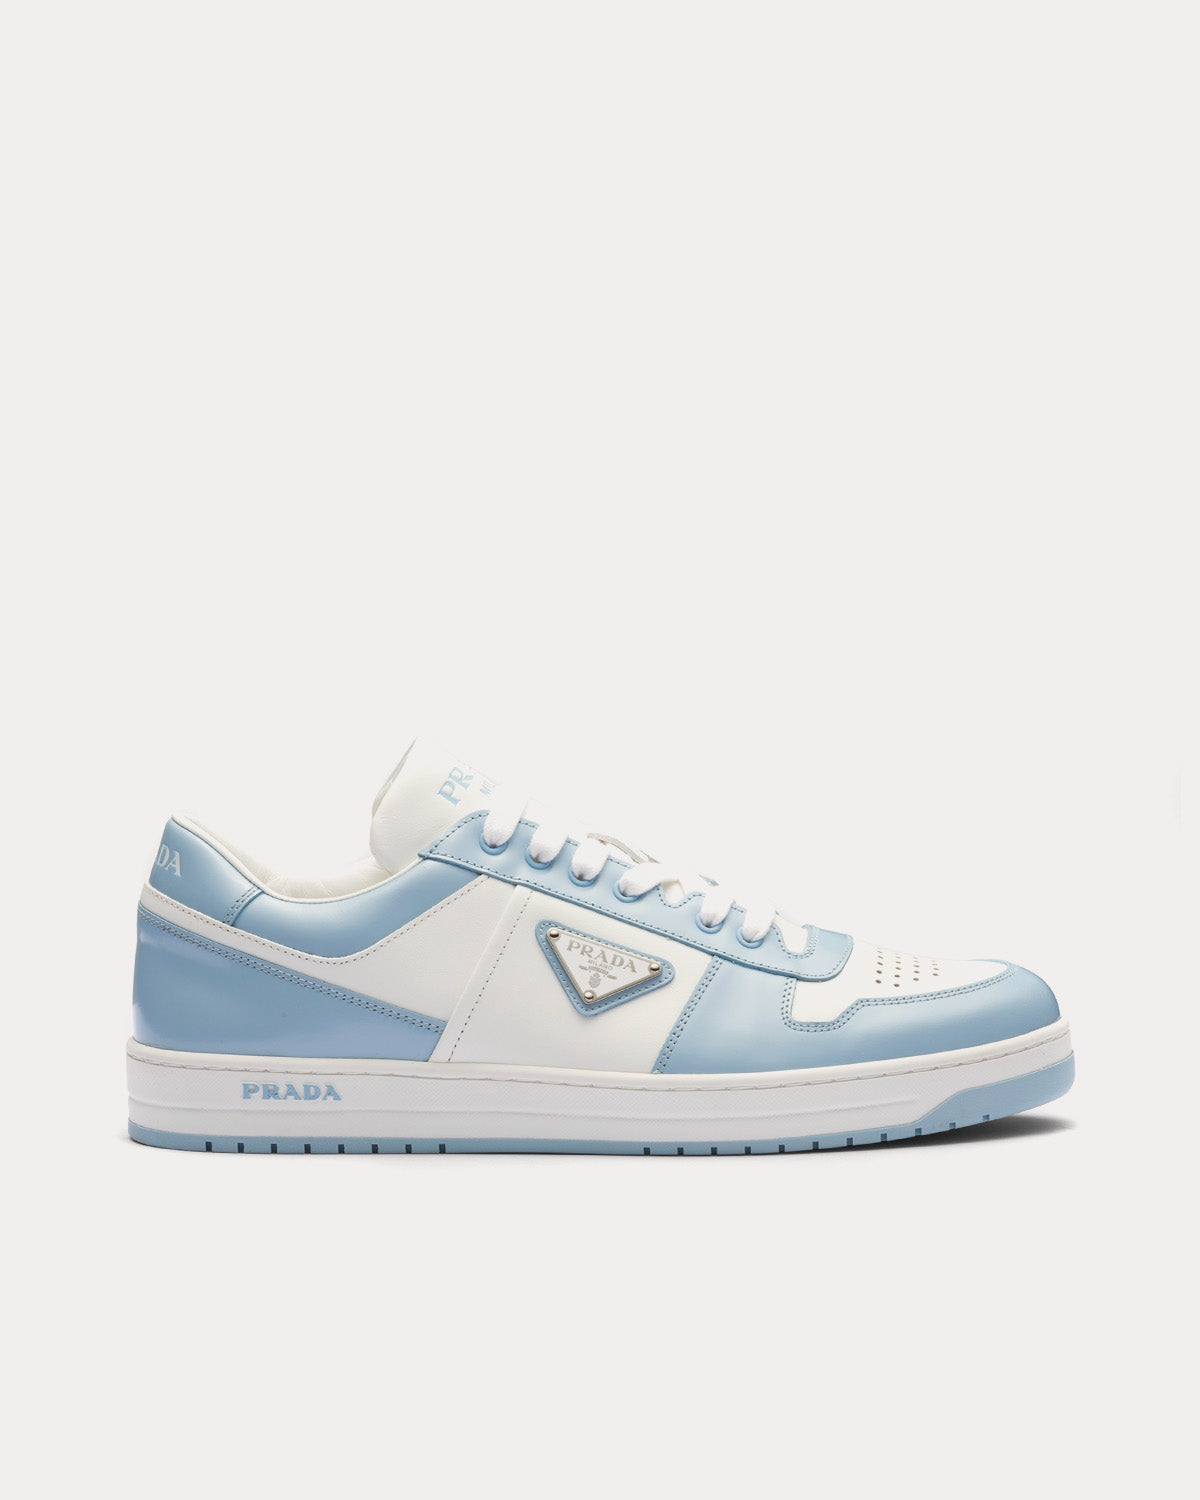 Prada Downtown Leather White / Sky Blue Low Top Sneakers - Sneak in Peace